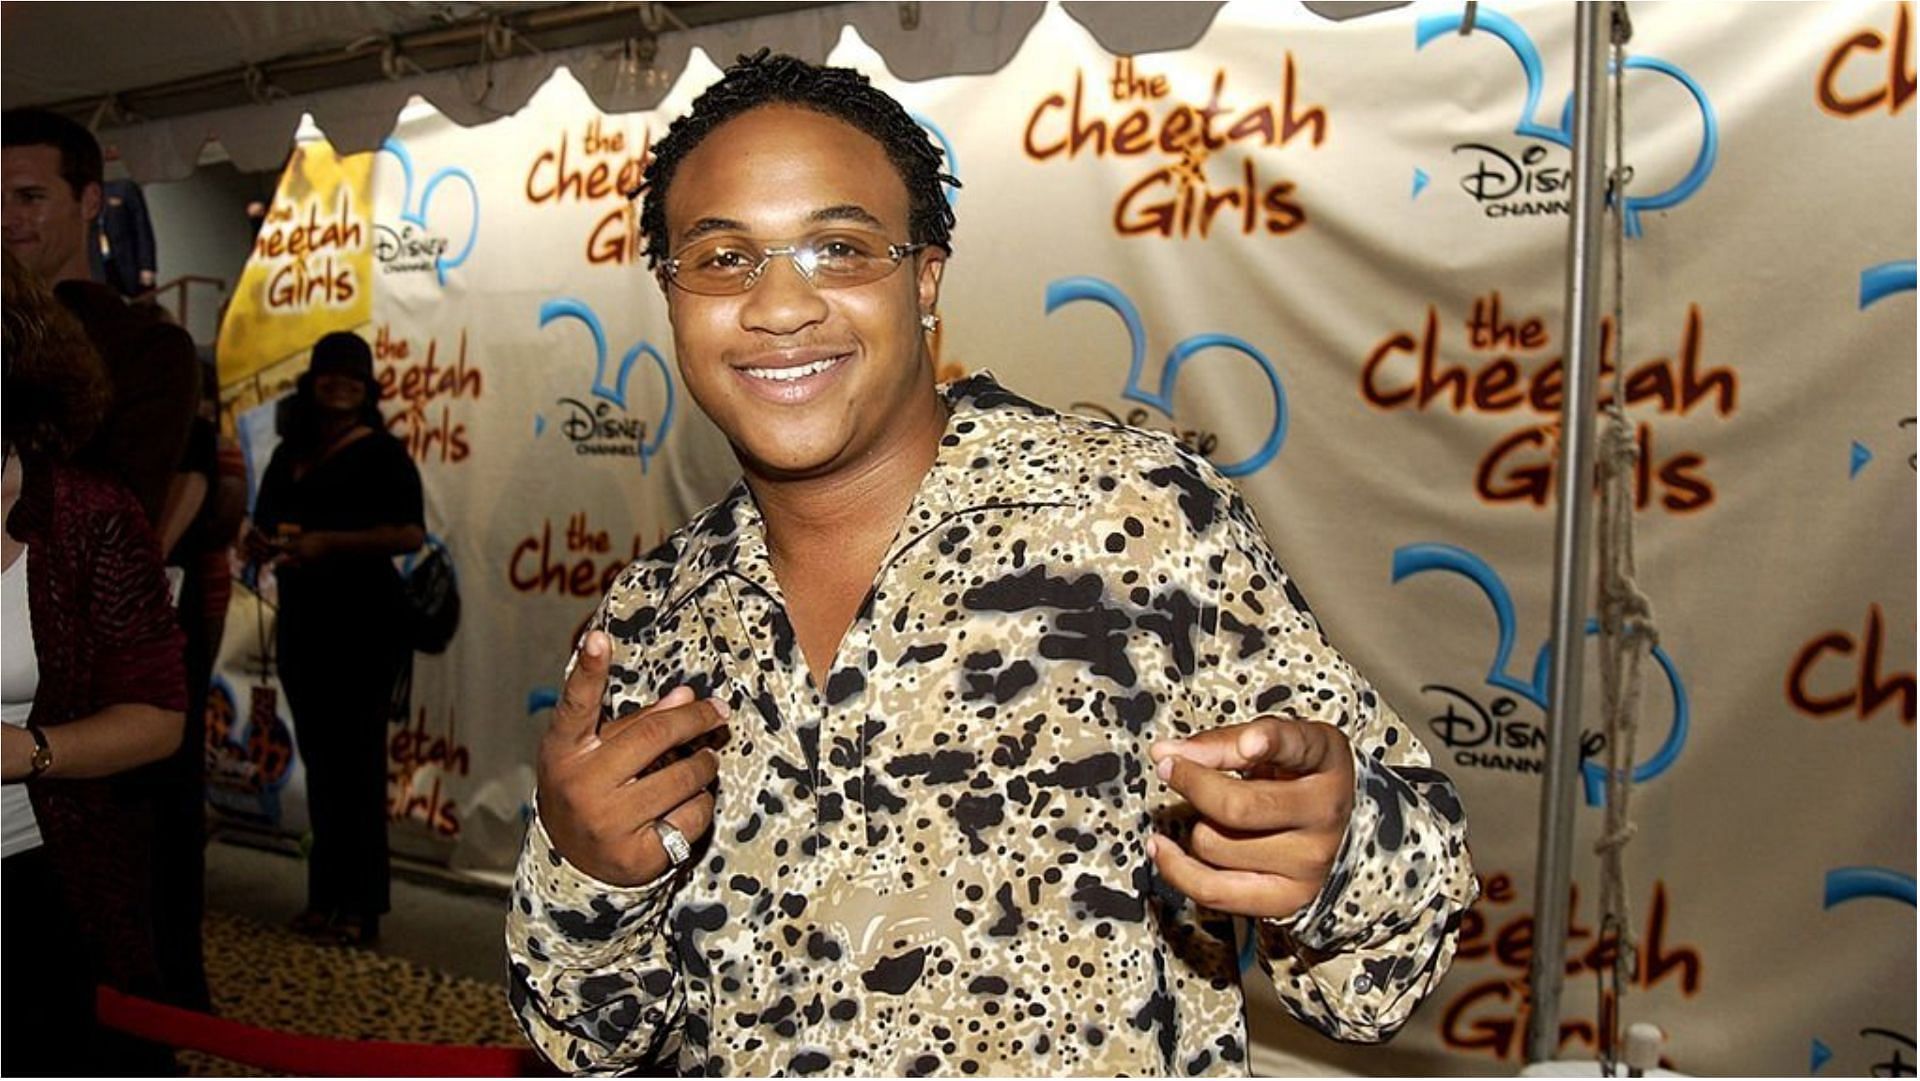 Orlando Brown has been featured in many films and TV shows and released two albums (Image via Theo Wargo/Getty Images)